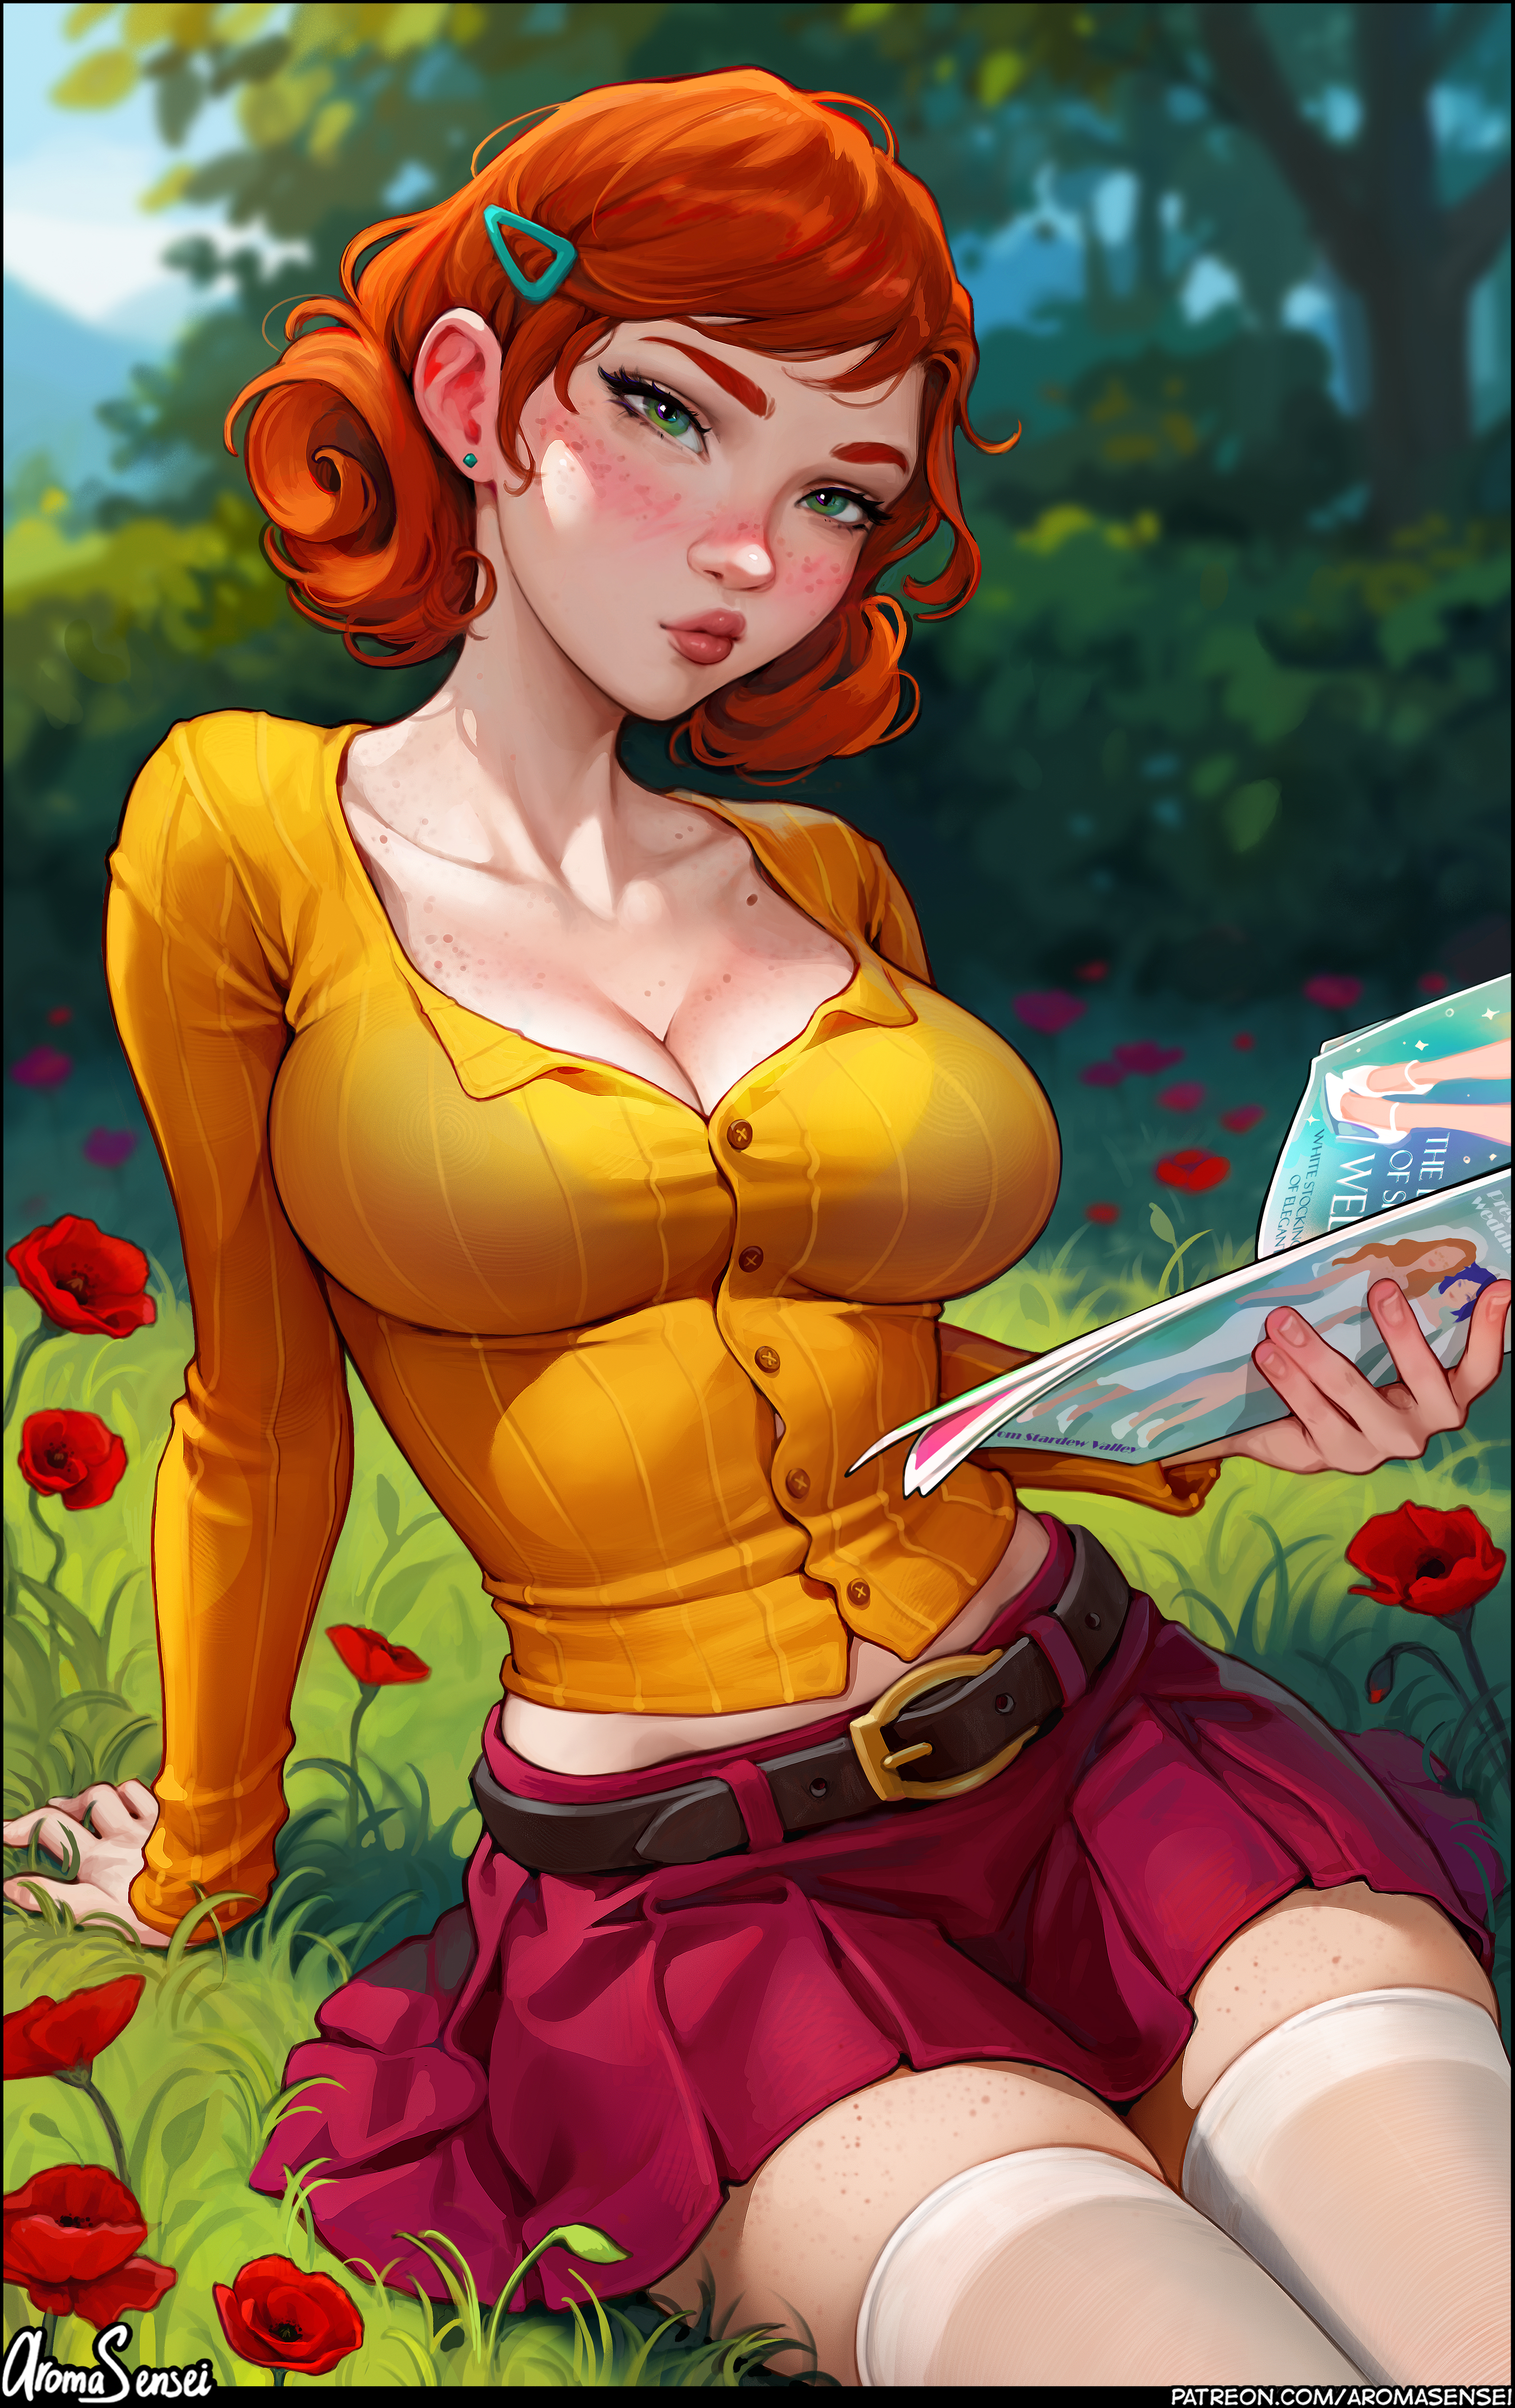 General 3145x5000 Penny (Stardew Valley) Stardew Valley video games video game girls video game characters artwork drawing fan art Aroma Sensei